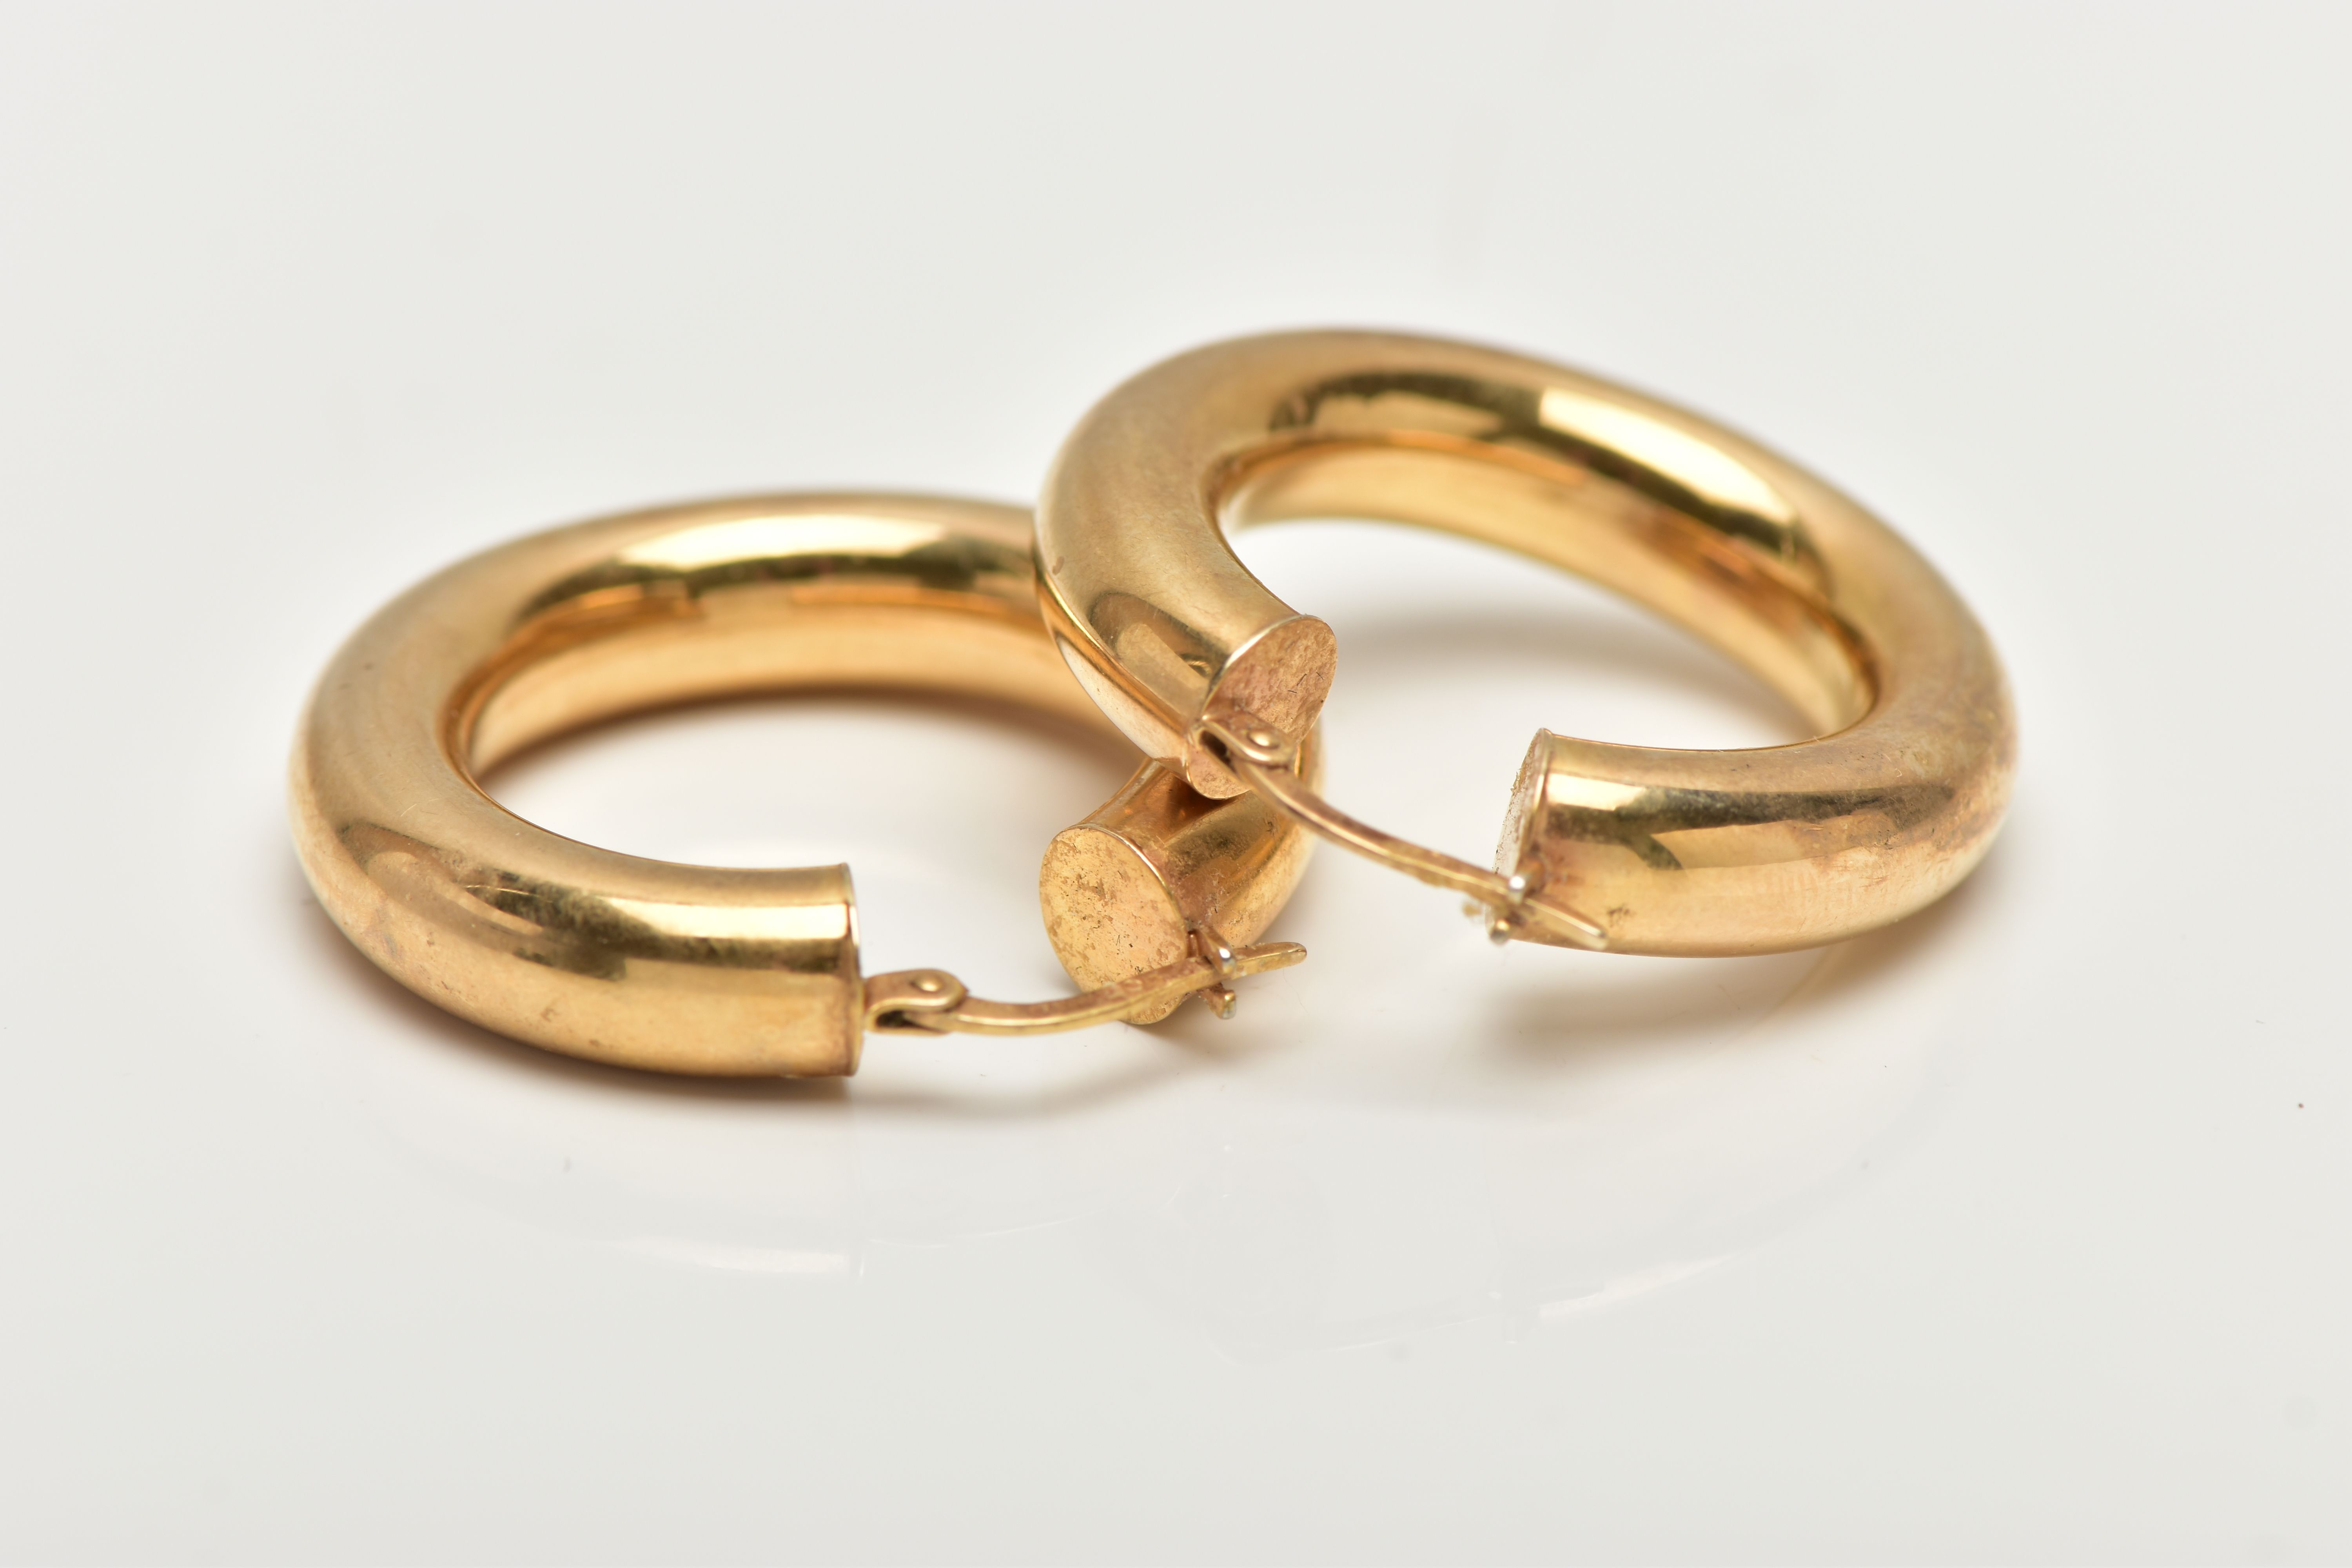 A PAIR 0F 9CT GOLD HOOP EARRINGS, hollow polished hoop, with lever fittings, hallmarked 9ct - Image 2 of 2